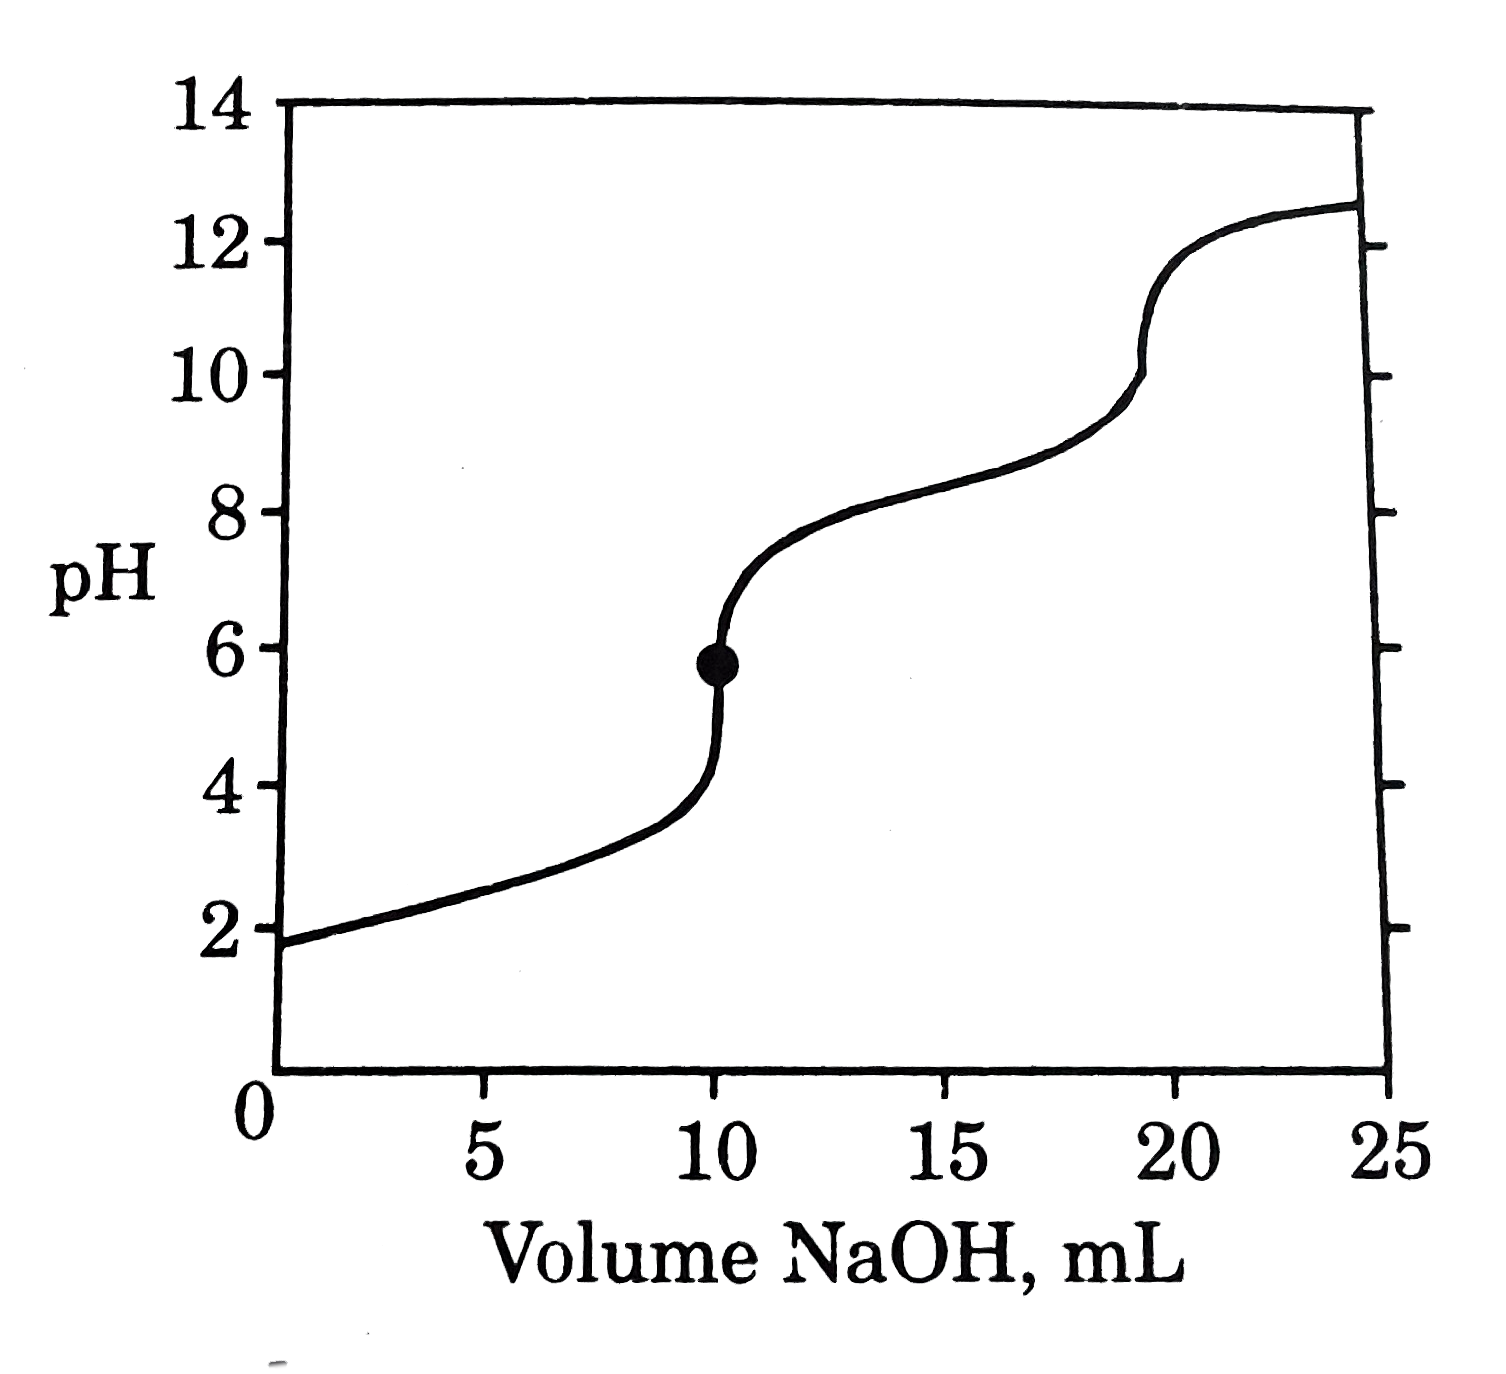 A 0.100M aqueous solution of H(2)SeO(3) is titrated with 1.000M NaOH solution. At the point marked with a circle on the titration curve, which species represent at least 10% of the total selenium in solution ?